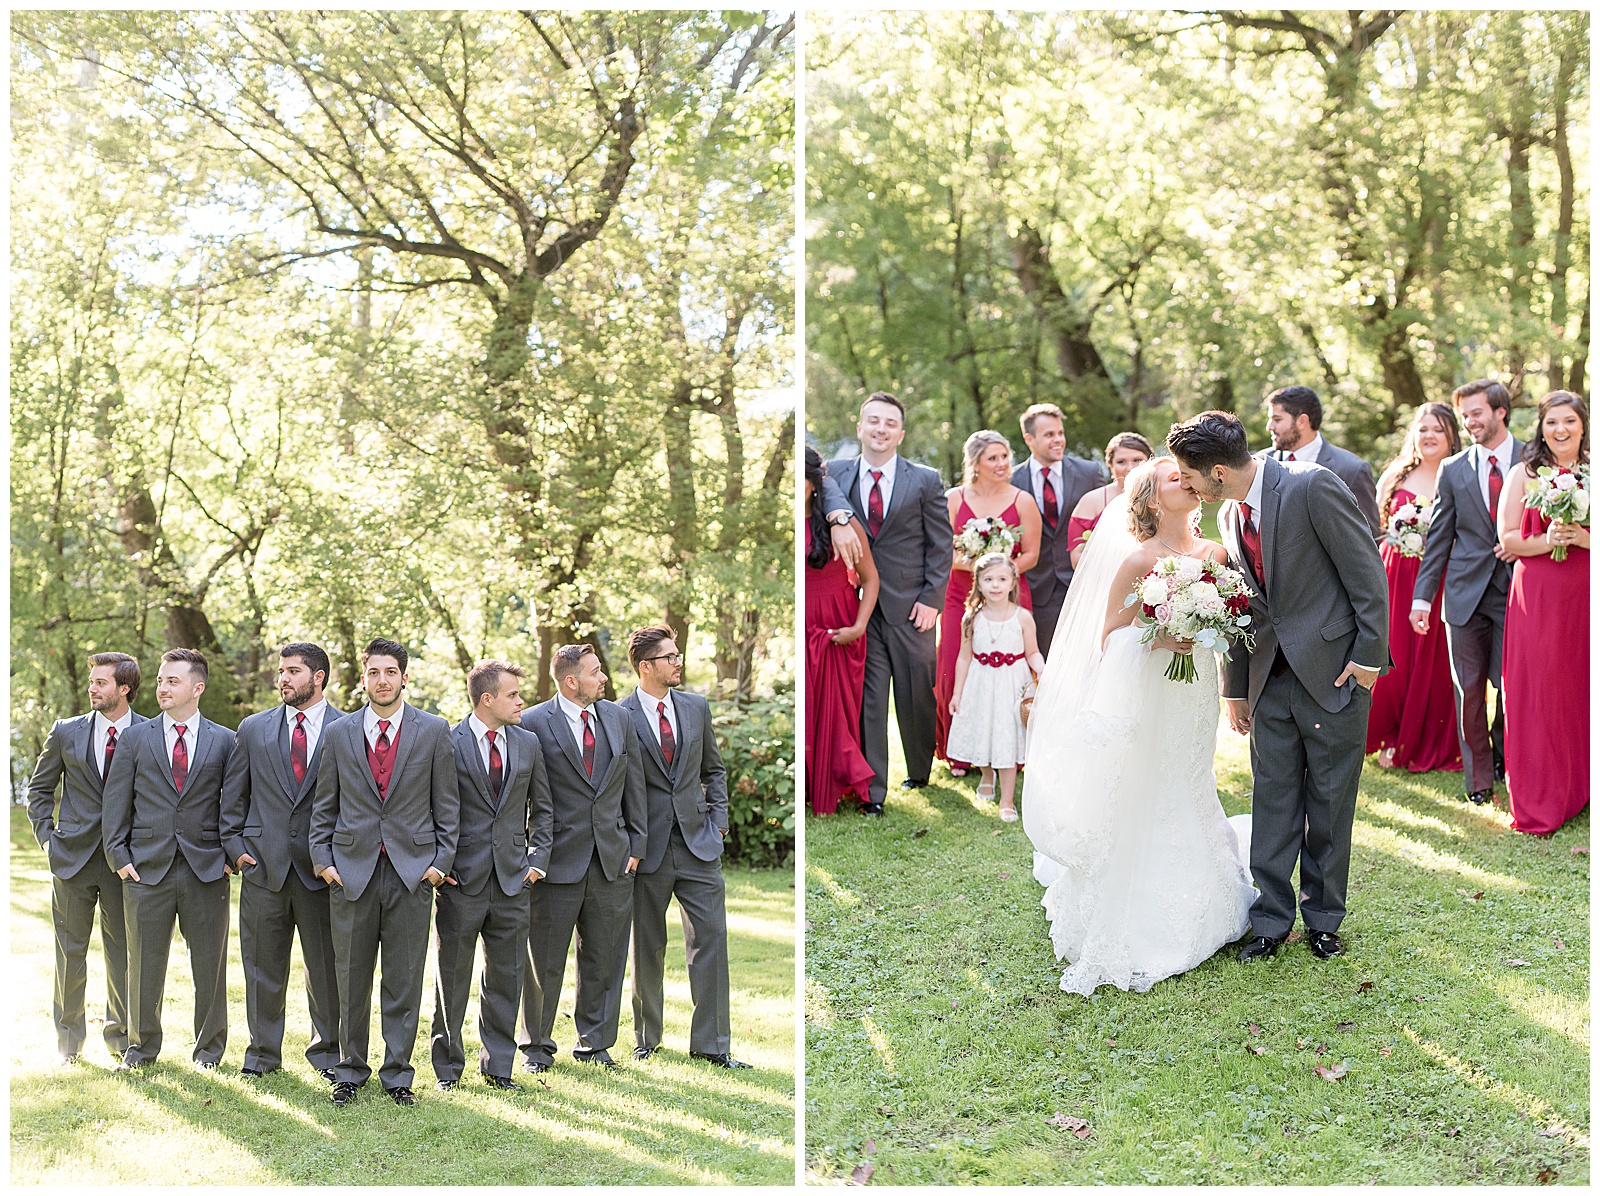 groom is standing in the middle at the point and three of his groomsmen stand tapered to his right and four groomsmen stand tapered behind him to his left while in the grass with trees and sunshine behind them and they all have their hands in their pockets and are looking over their shoulders at Riverdale Manor in Lancaster, PA, bride is on the left and groom is on the right and they are holding hands and kissing in the center of the photo with their bridal party standing behind them looking at them and smiling while standing in the grass with trees and sunshine behind them at Riverdale Manor in Lancaster, PA